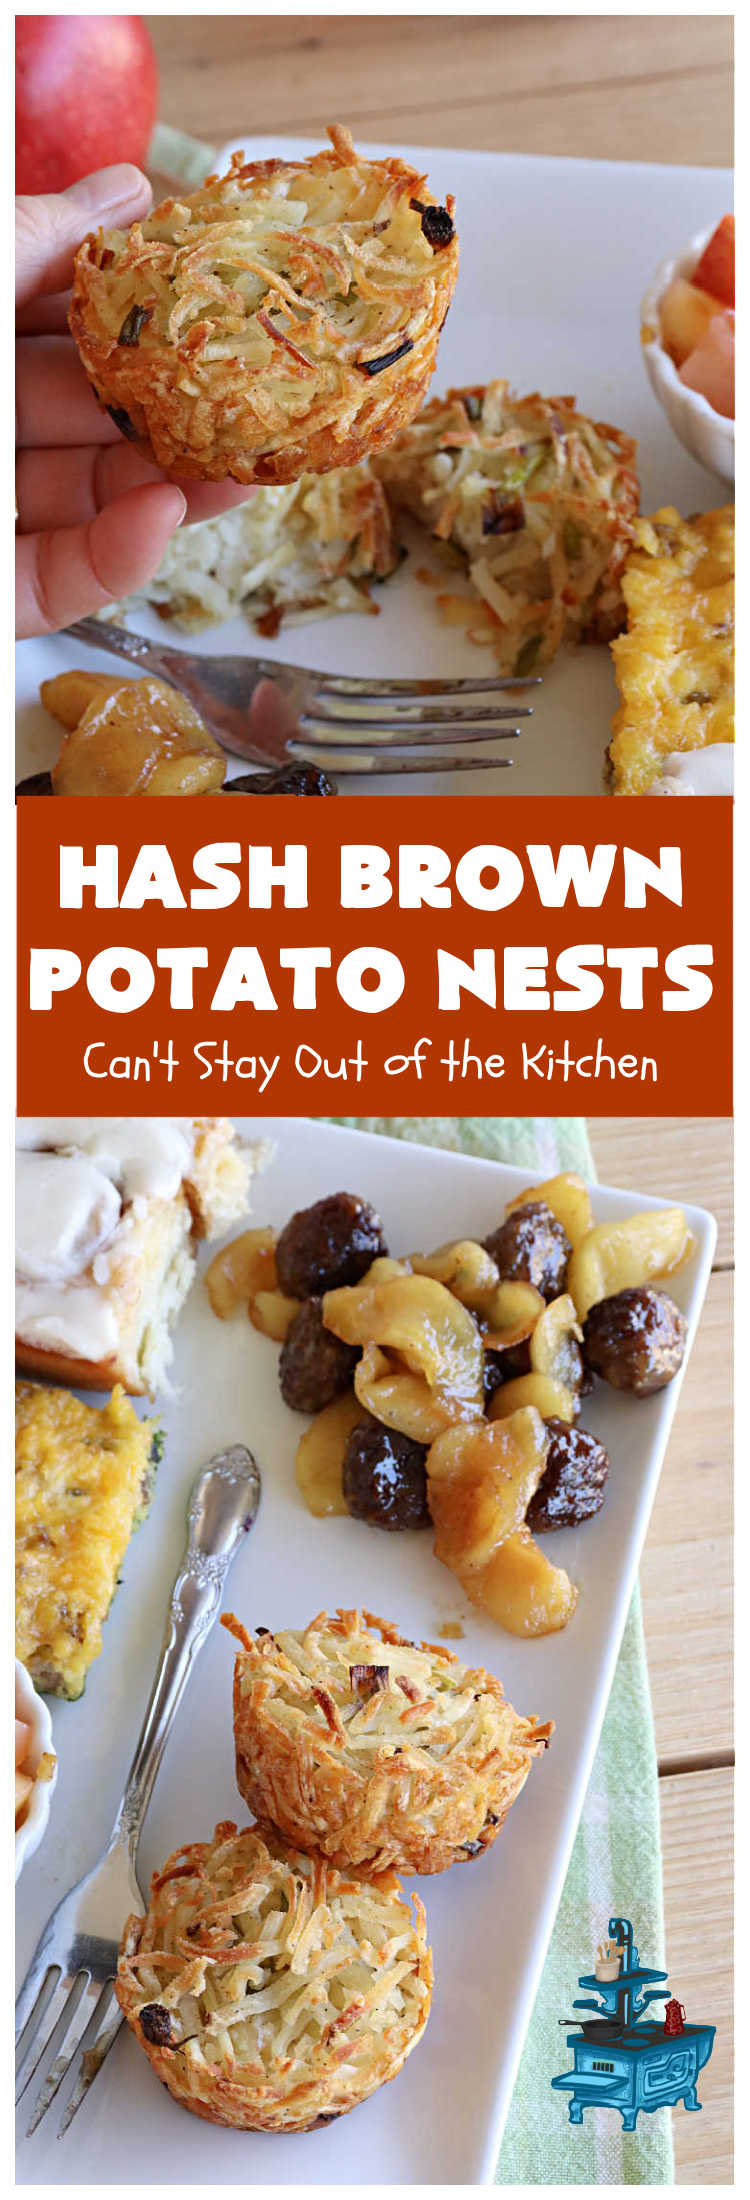 Hash Brown Potato Nests | Can't Stay Out of the Kitchen | these adorable #potato nests are marvelous for weekend, company or a #holiday #breakfast. They're simple to make & are baked in muffin tins. Excellent side for a #HolidayBreakfast. #GlutenFree #ParmesanCheese #HashBrowns #HashBrownPotatoNestsHash Brown Potato Nests | Can't Stay Out of the Kitchen | these adorable #potato nests are marvelous for weekend, company or a #holiday #breakfast. They're simple to make & are baked in muffin tins. Excellent side for a #HolidayBreakfast. #GlutenFree #ParmesanCheese #HashBrowns #HashBrownPotatoNests